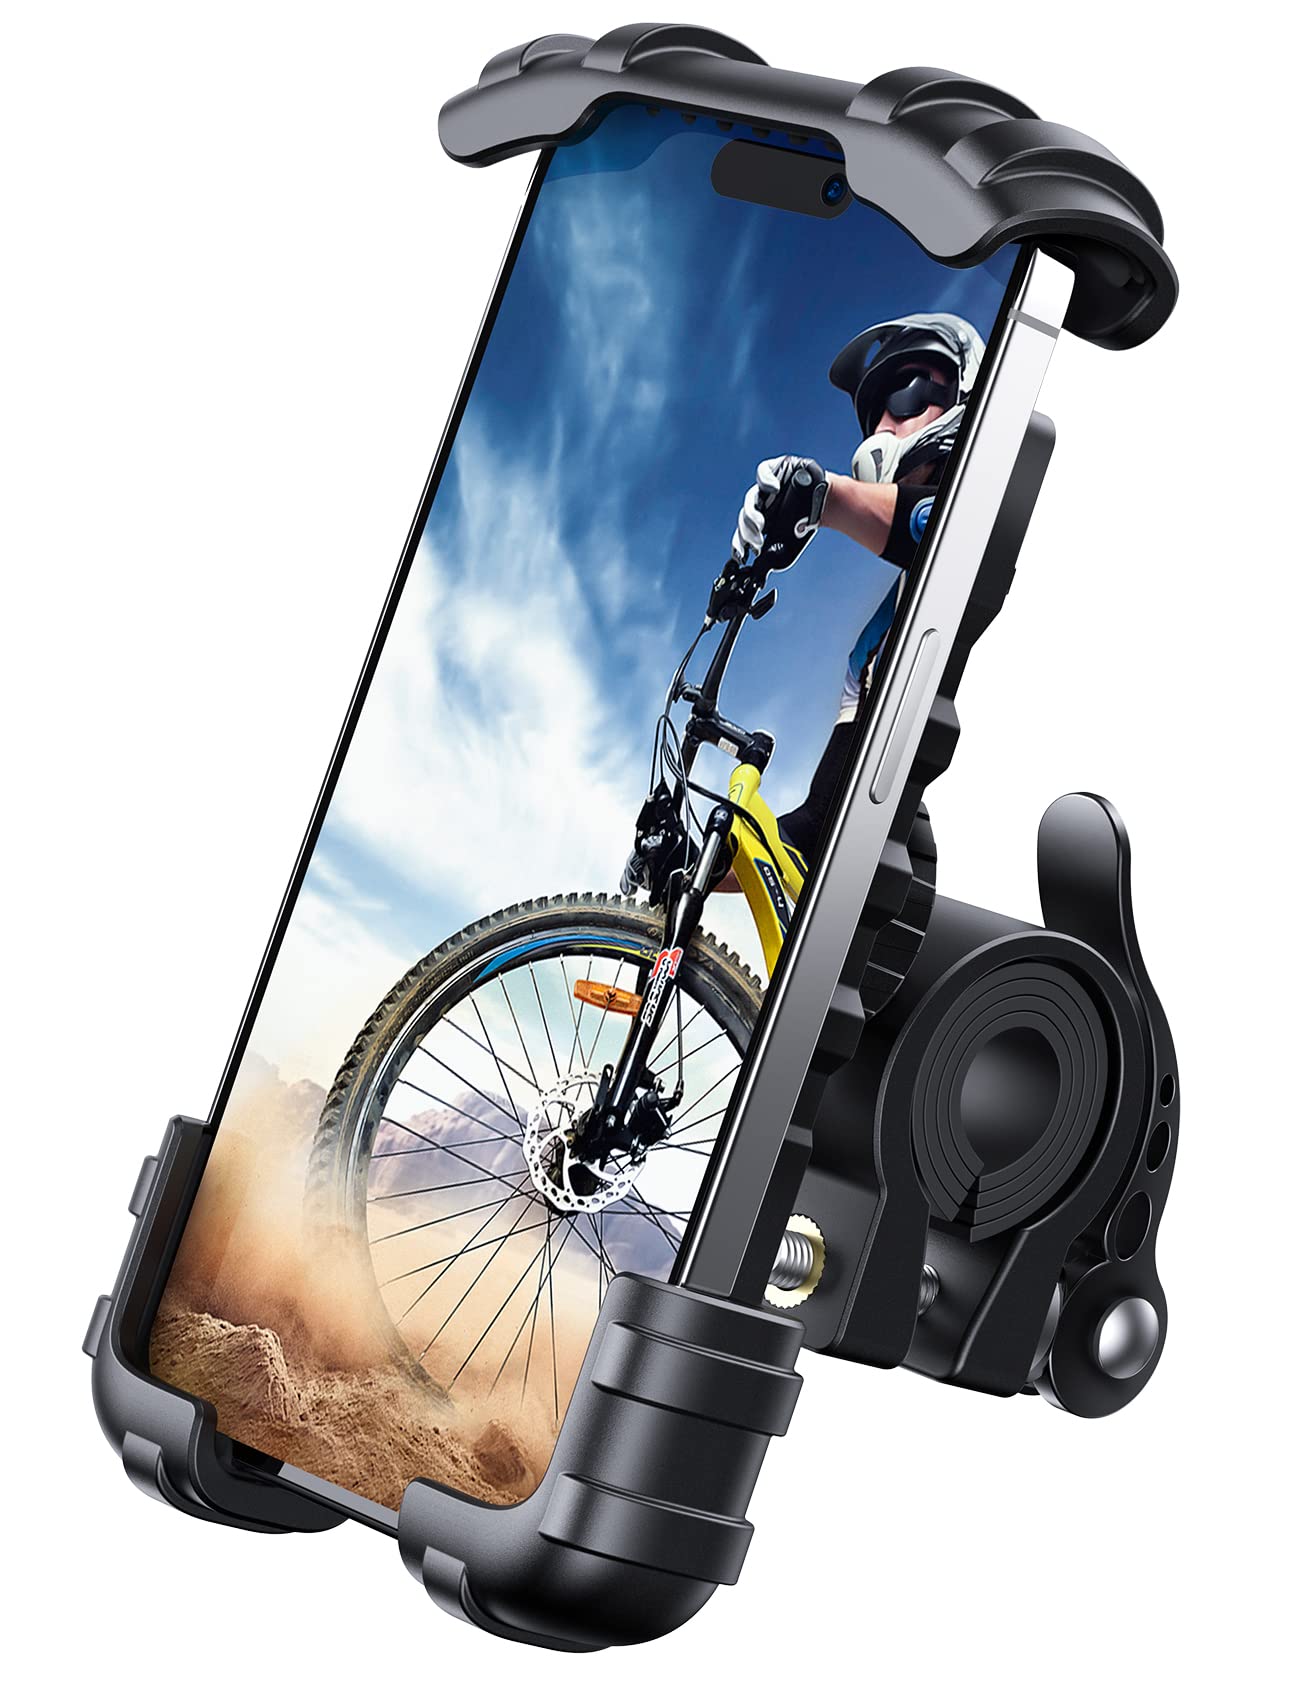 Lamicall Bike Phone Holder, Motorcycle Phone Mount - Motorcycle Handlebar Cell Phone Clamp, Scooter Phone Clip for iPhone 14 Plus/Pro Max, 13 Pro Max, S9, S10 and More 4.7